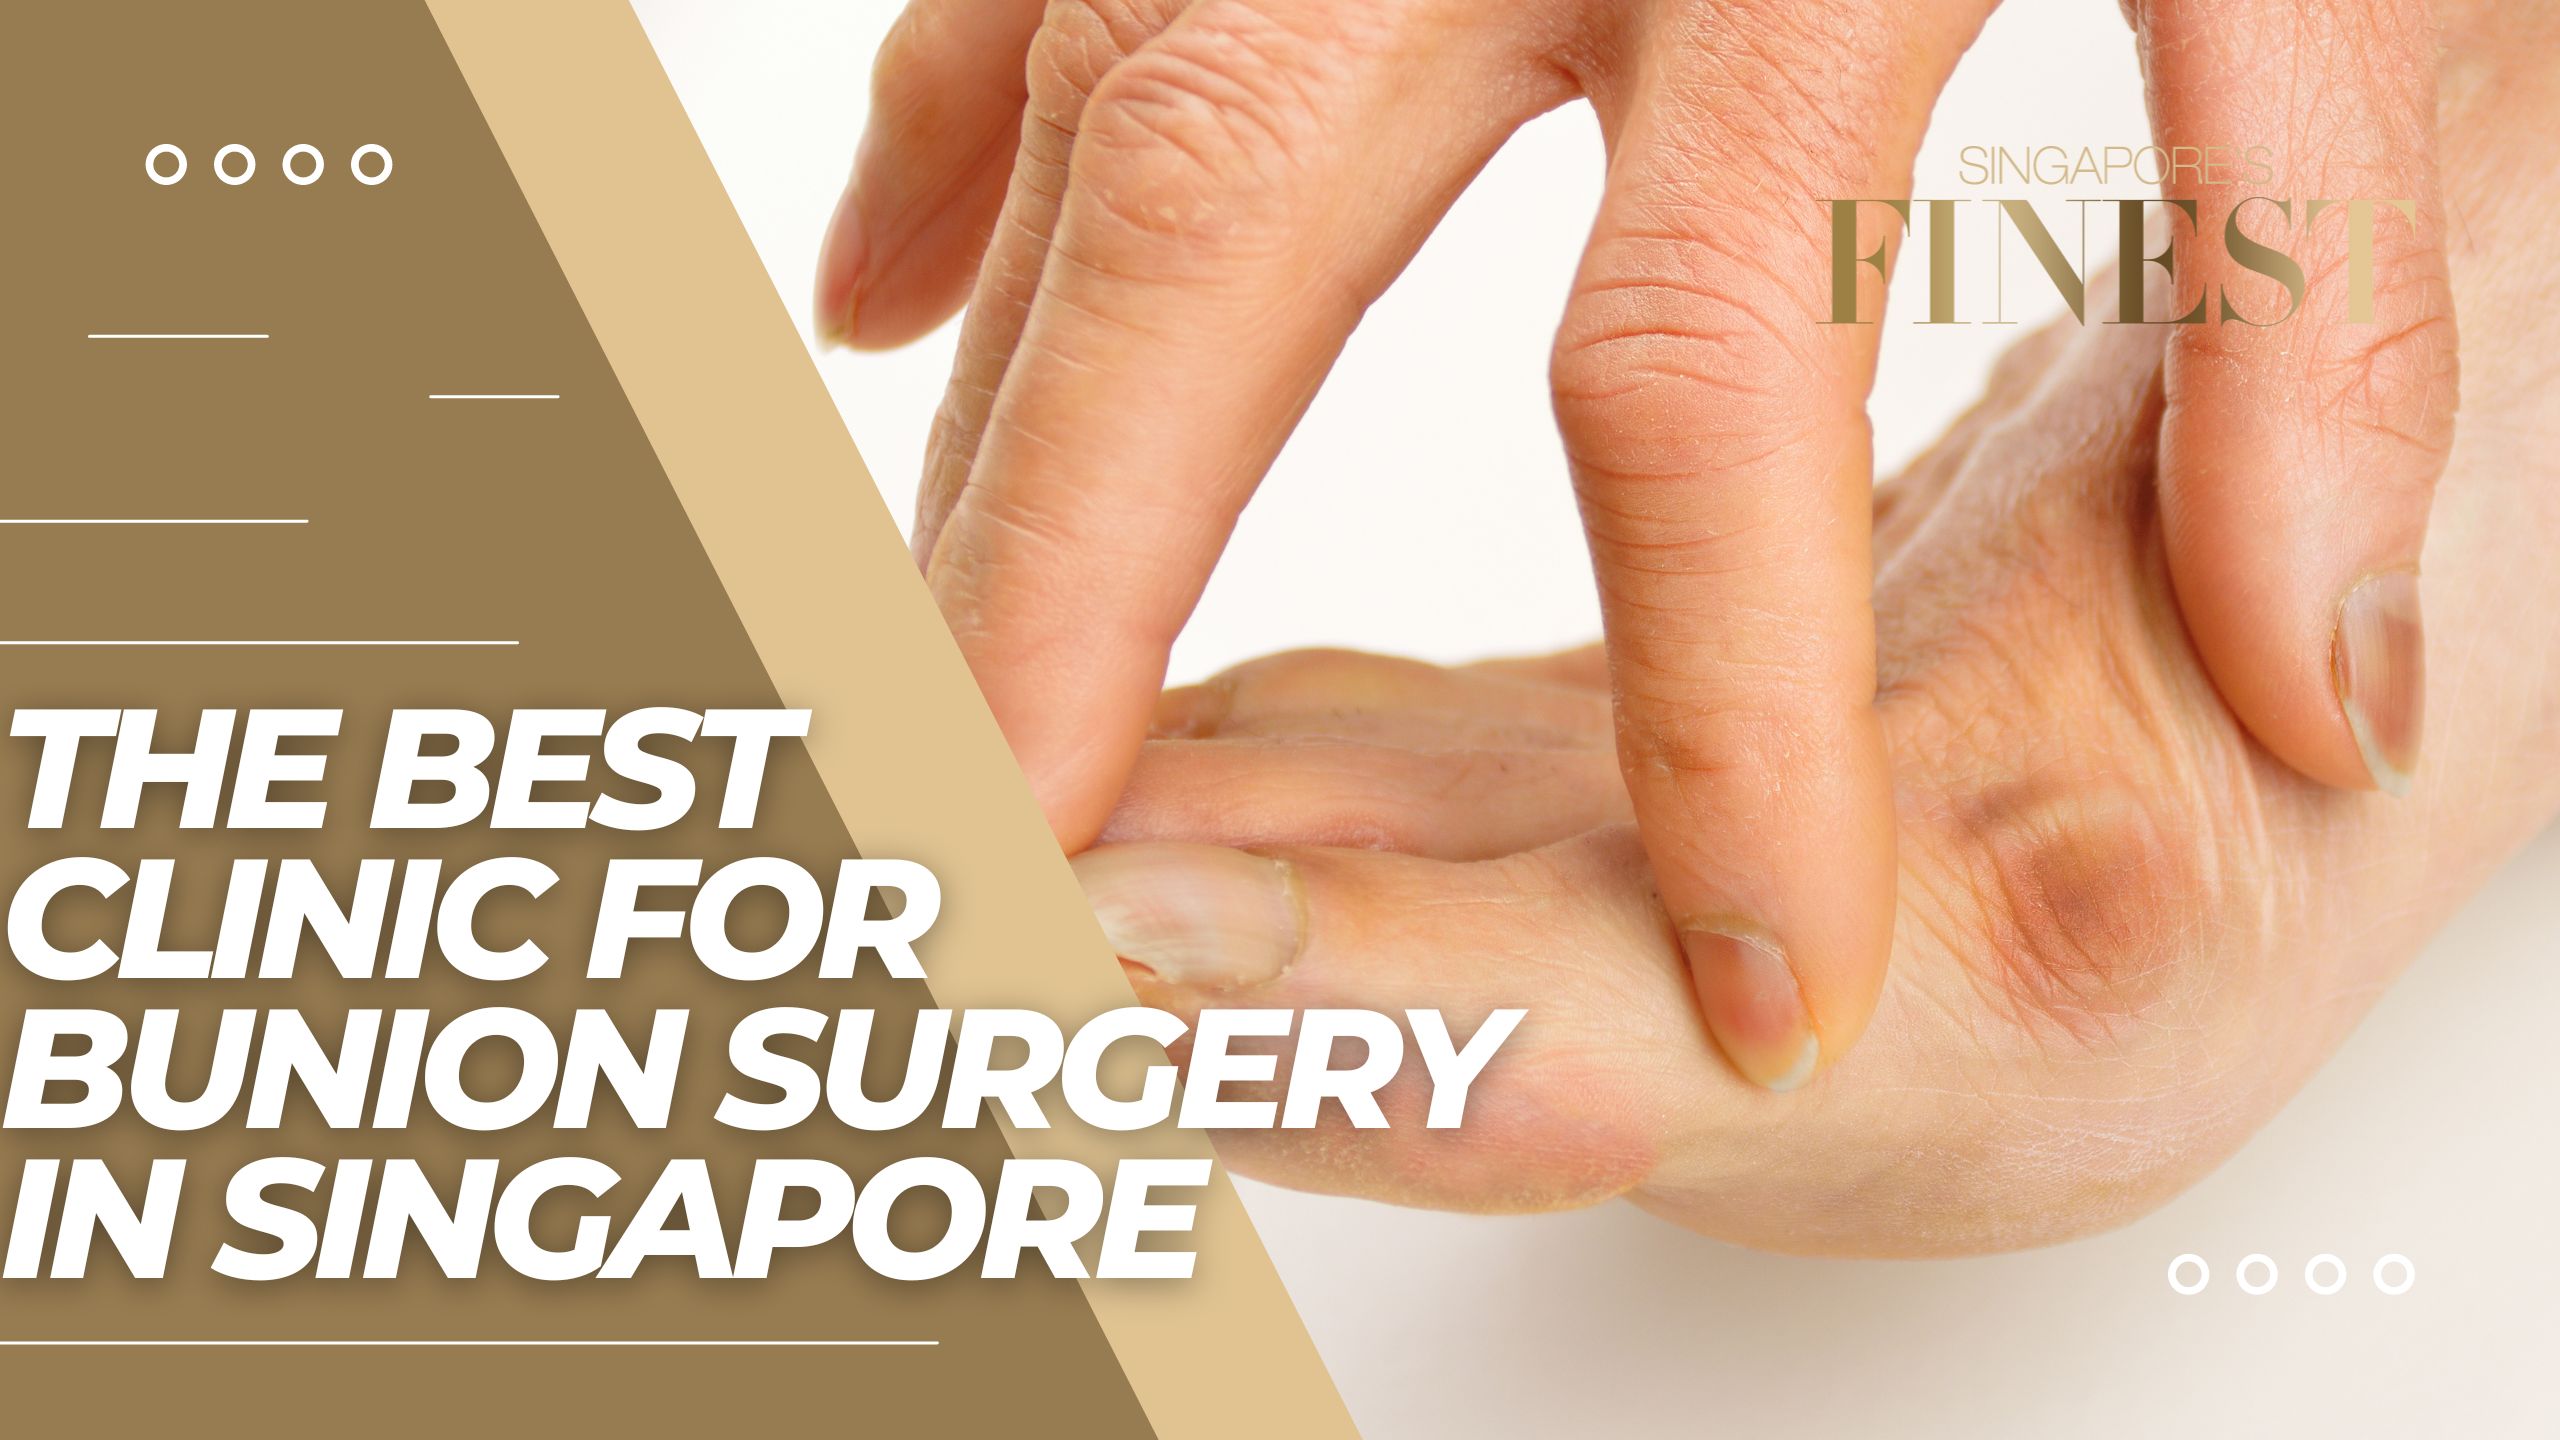 The Finest Clinics for Bunion Surgery in Singapore